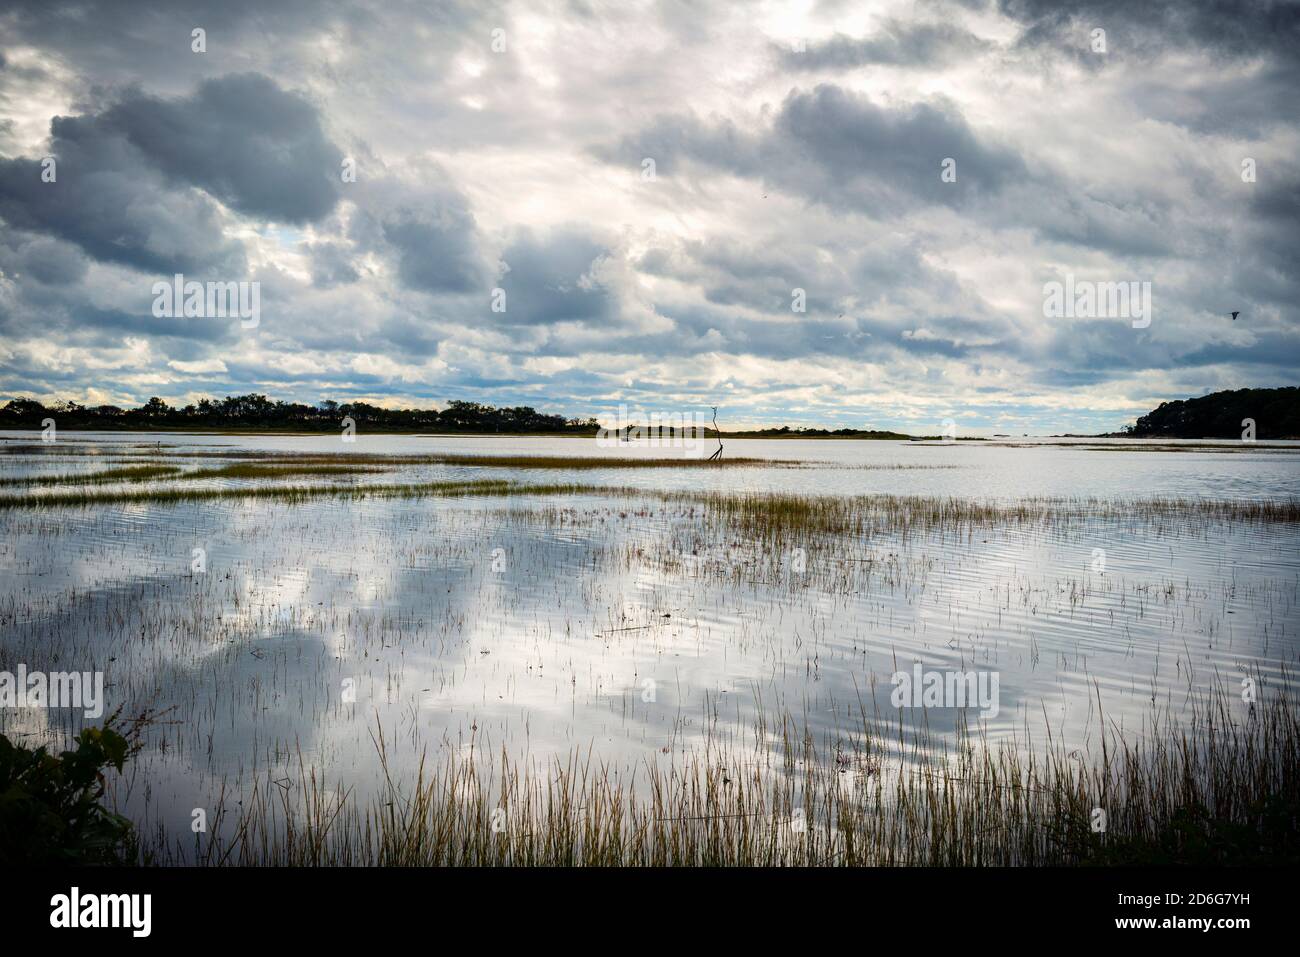 Clouds reflected in the water of a tidal salt marsh just after a rainstorm in autumn. Stock Photo